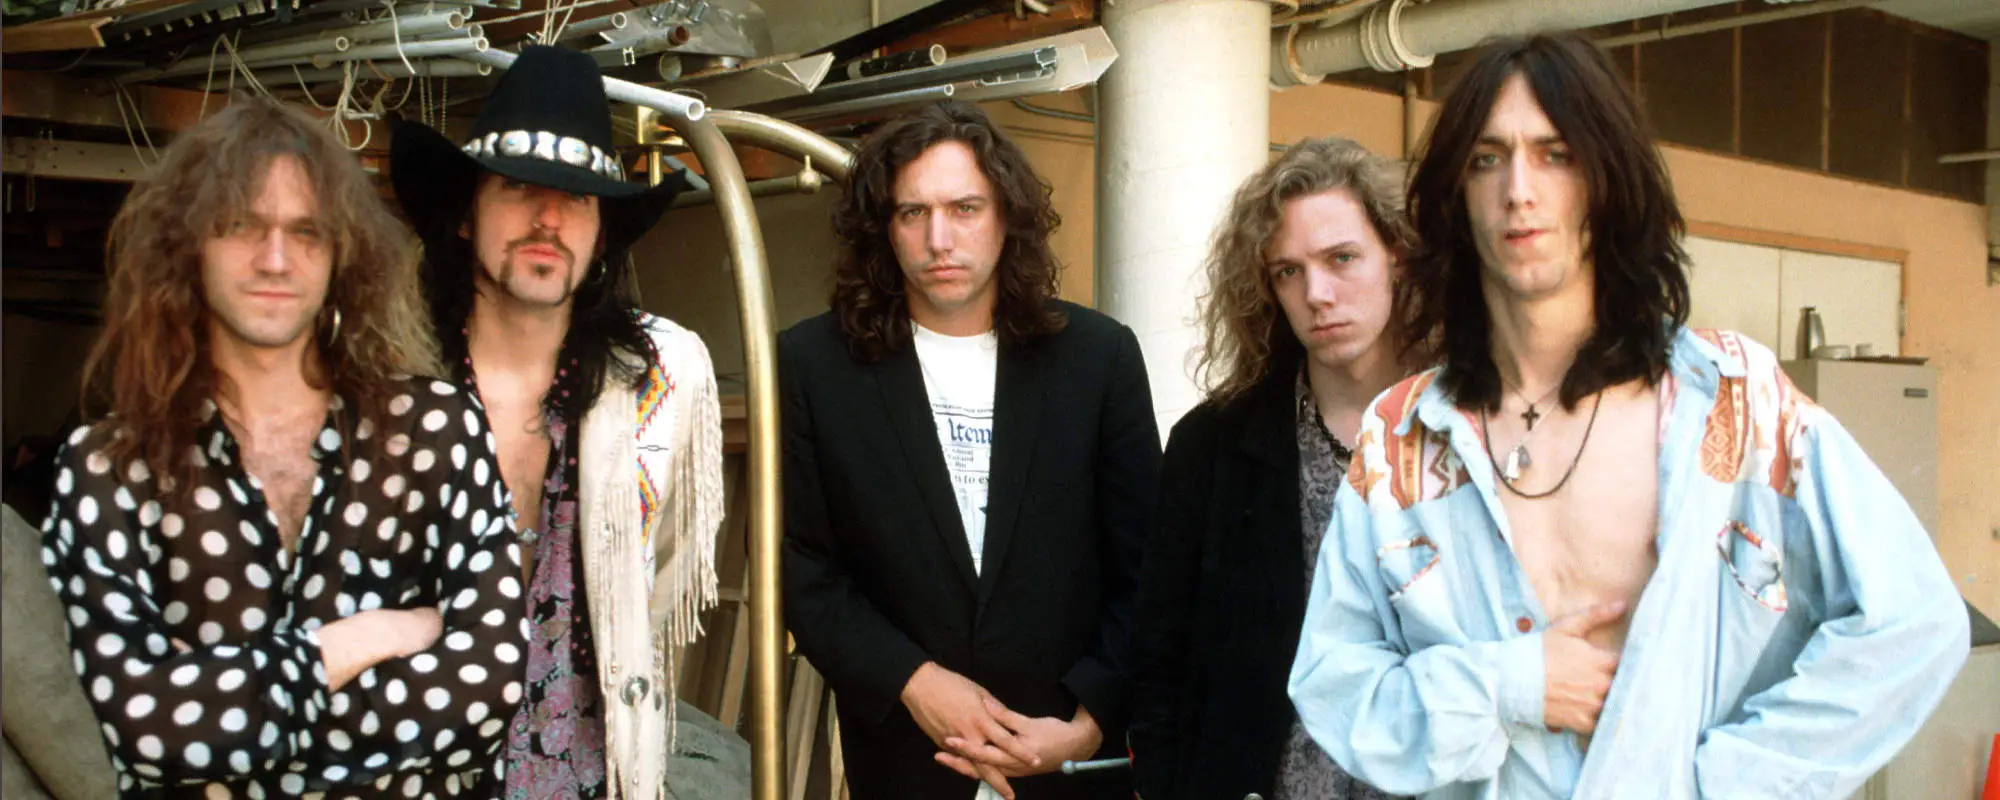 The Black Crowes Ready ‘Southern Harmony’ Deluxe Box Set